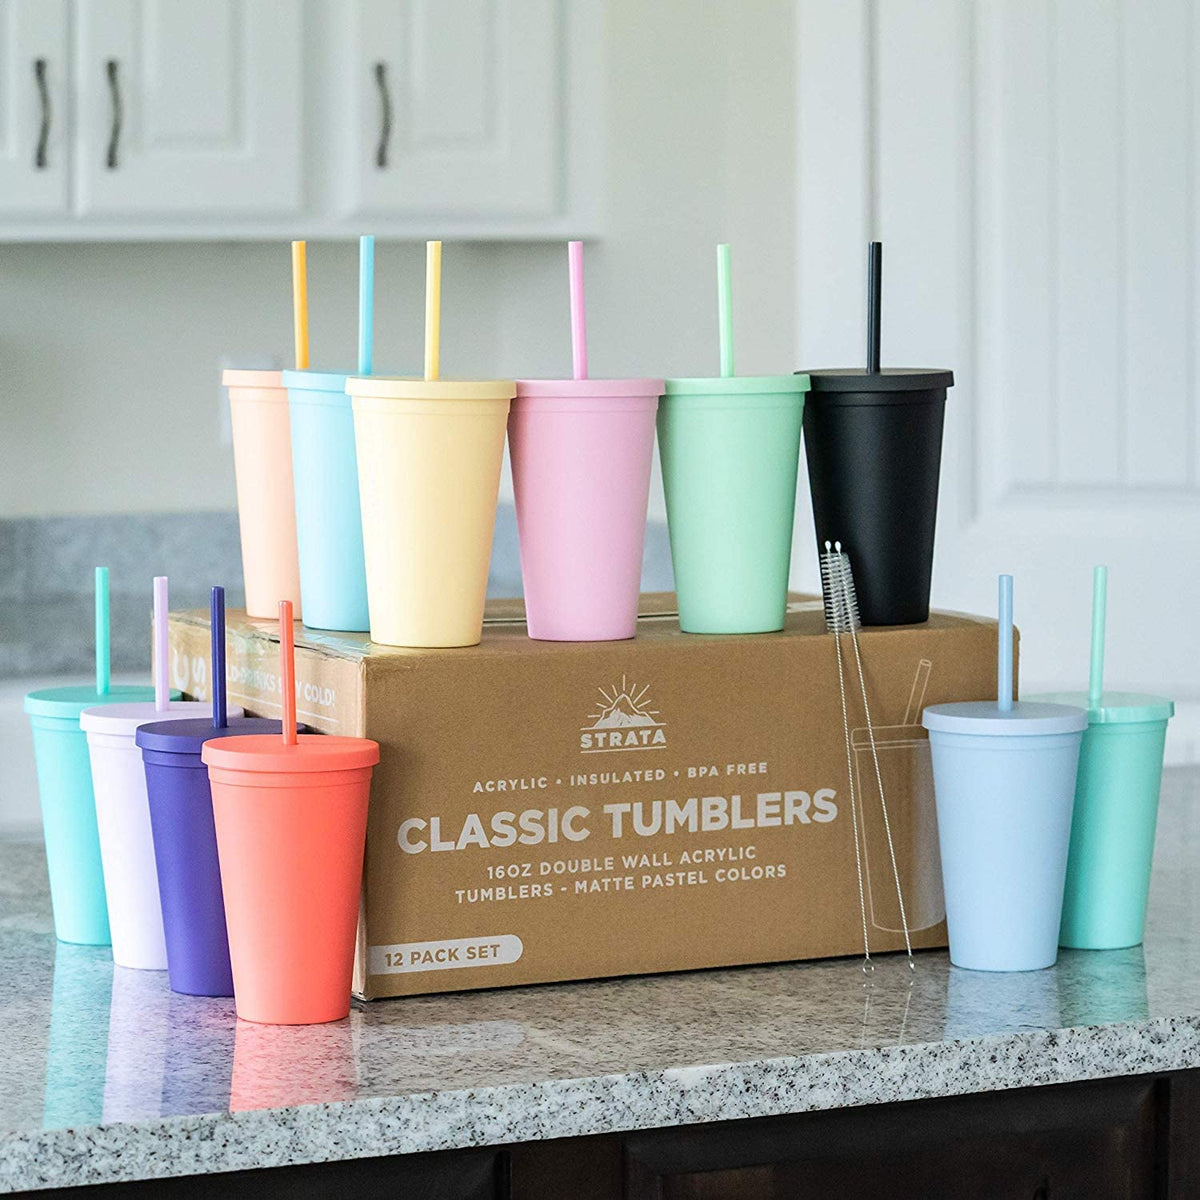 SKINNY TUMBLERS Matte Pastel Colored Acrylic Tumblers with Lids and Straws  (4 pack) | 16oz Double Wall Plastic Tumblers With FREE Straw Cleaner!